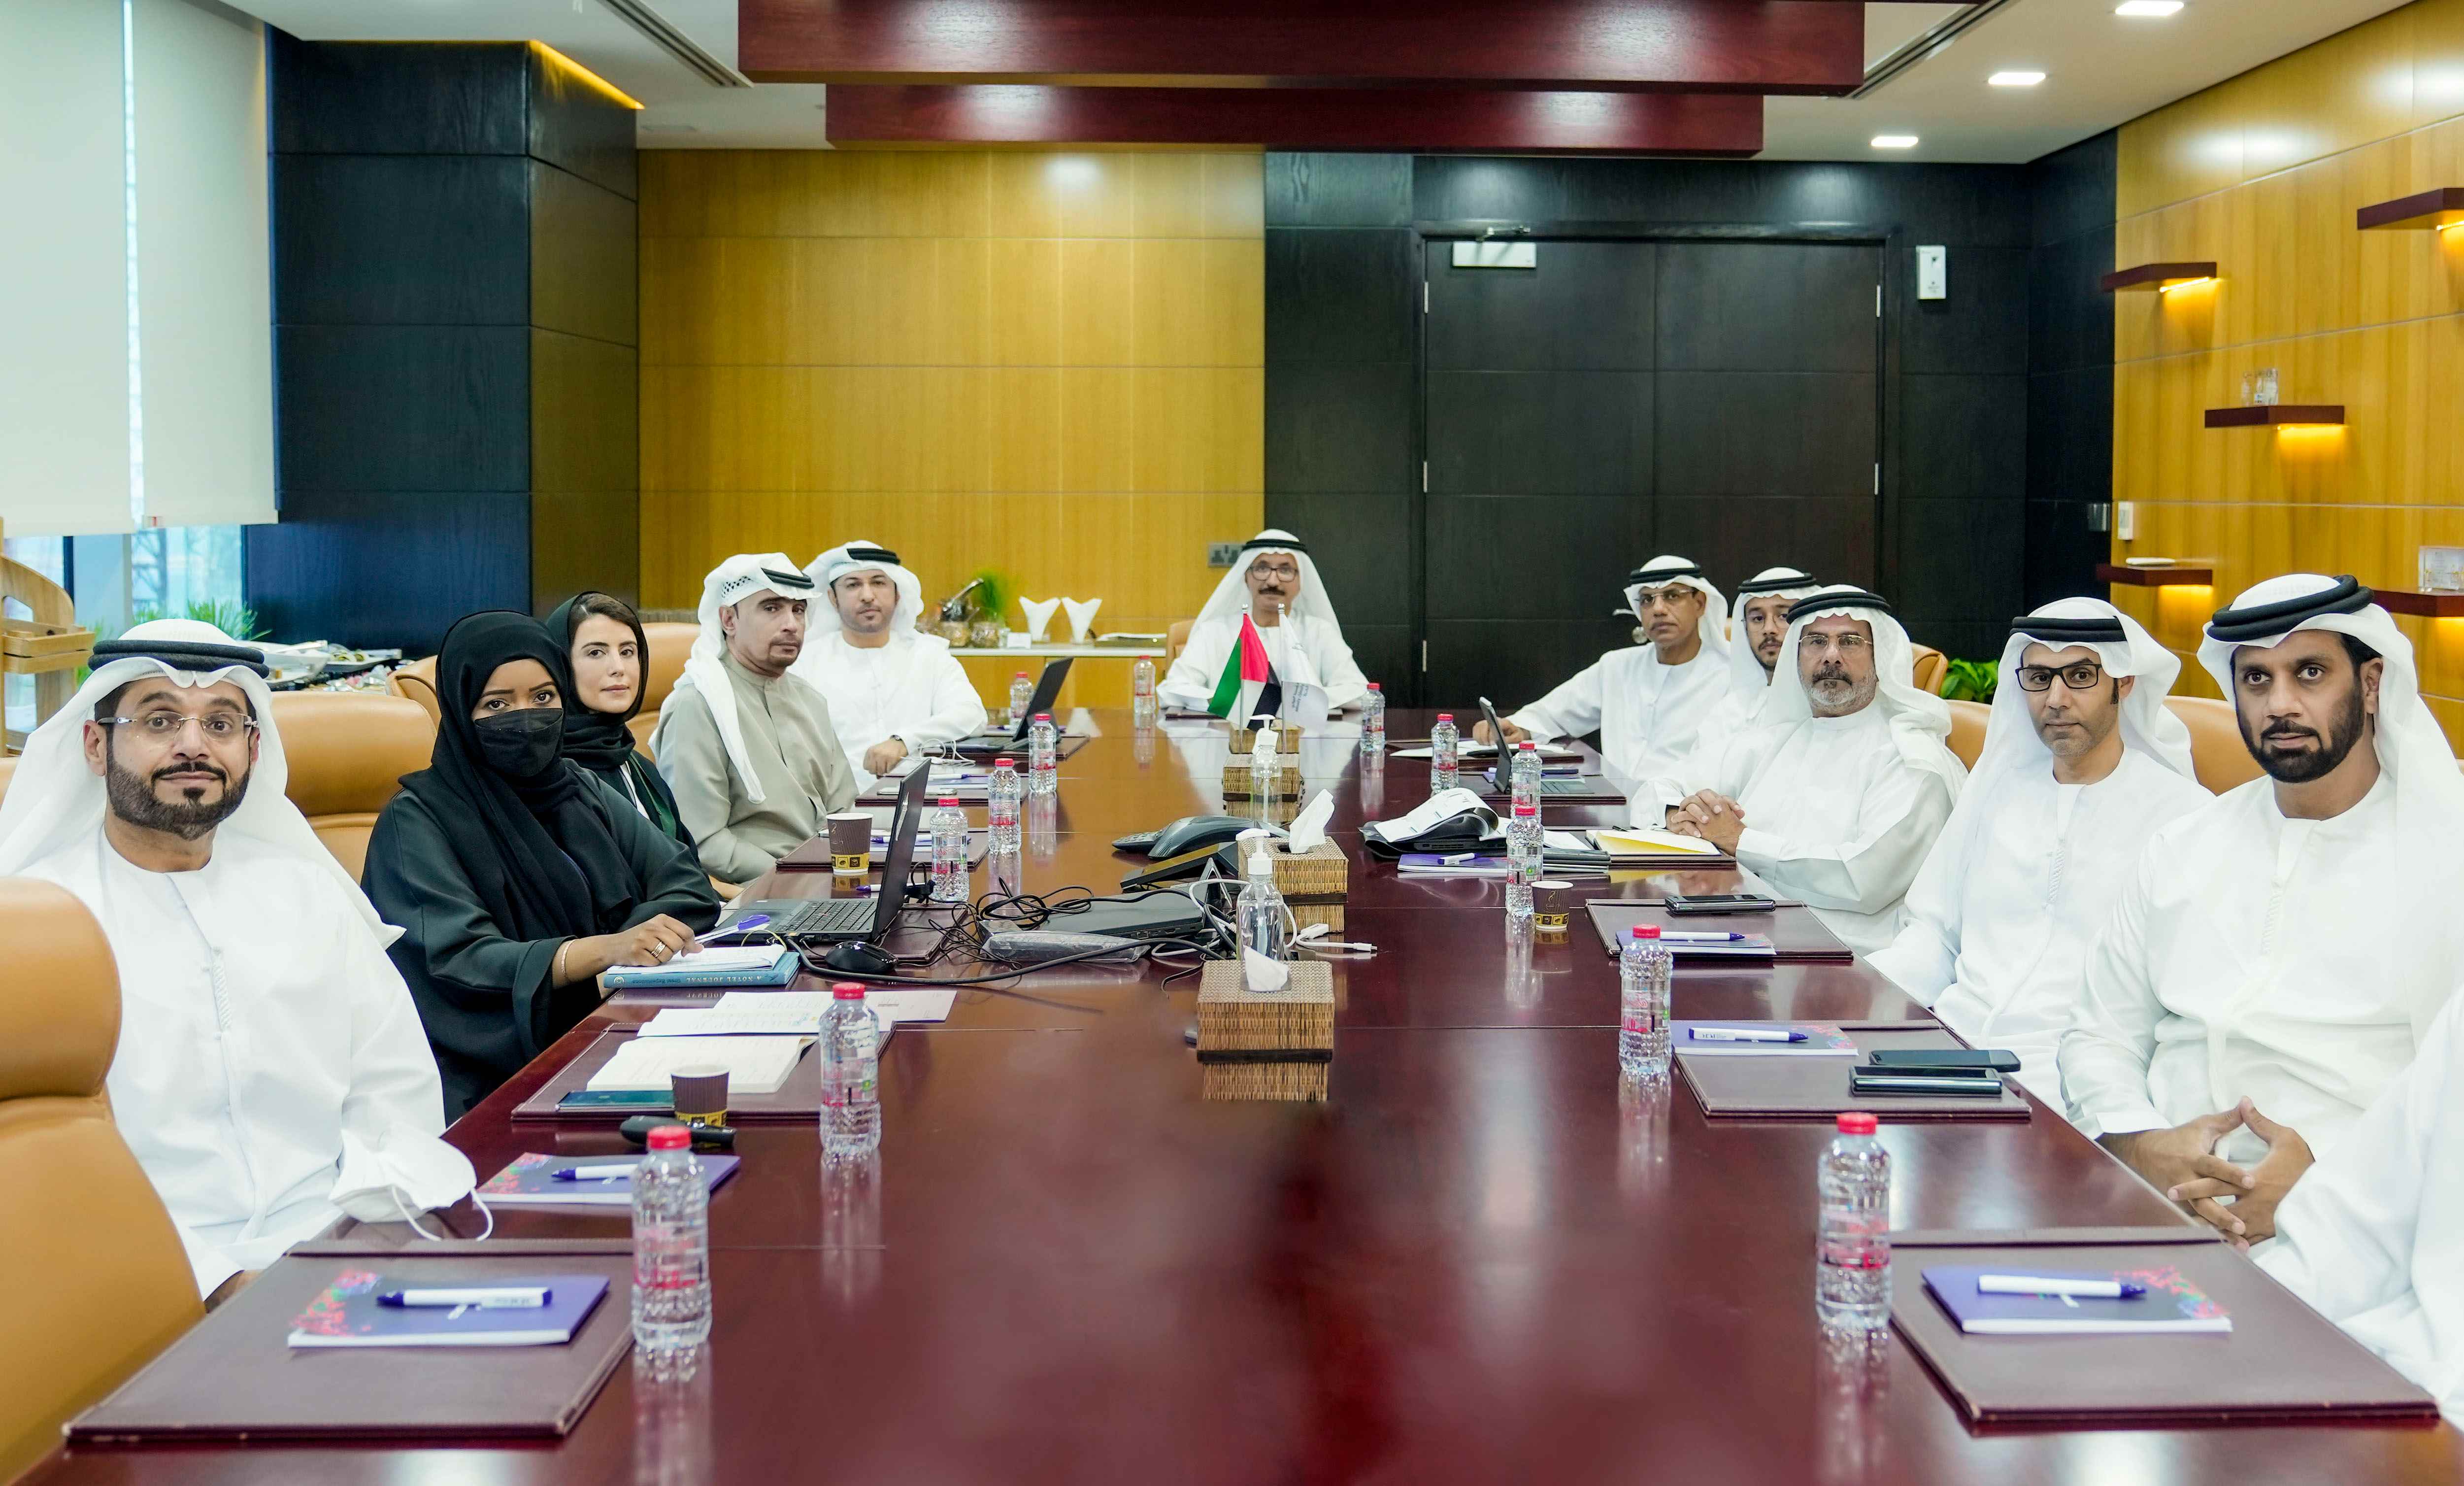 "Ports, Customs, and Free Zone" holds its Second Board Meeting for 2022